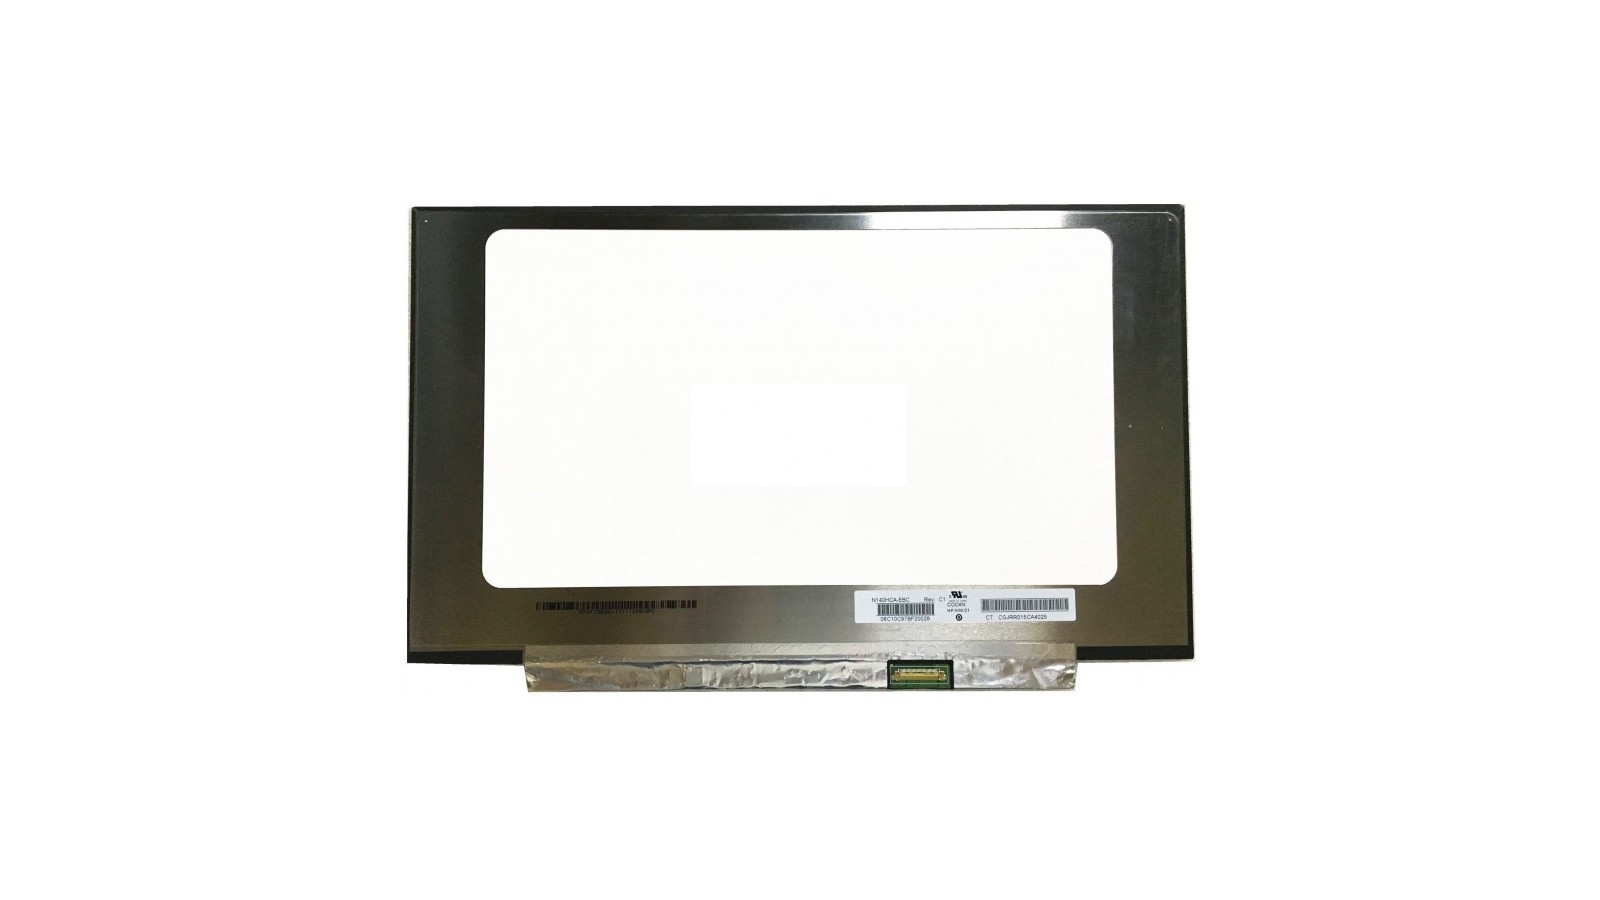 Display LCD Schermo 14.0 LED Slim compatibile ASUS ZENBOOK UX431F Full Hd